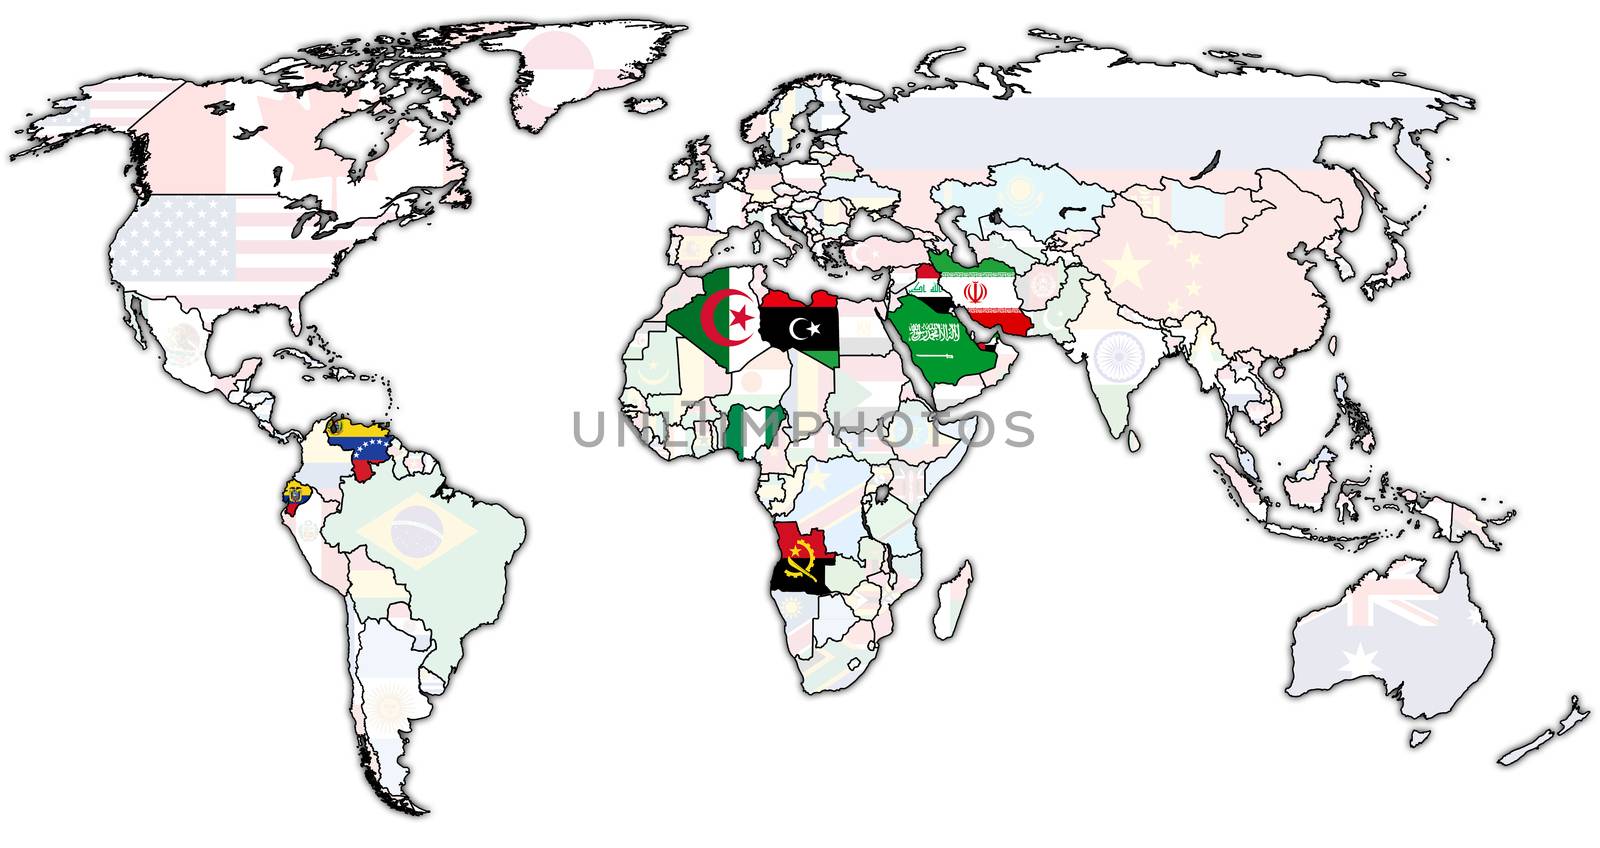 Organization of the Petroleum Exporting Countries on world map with national borders